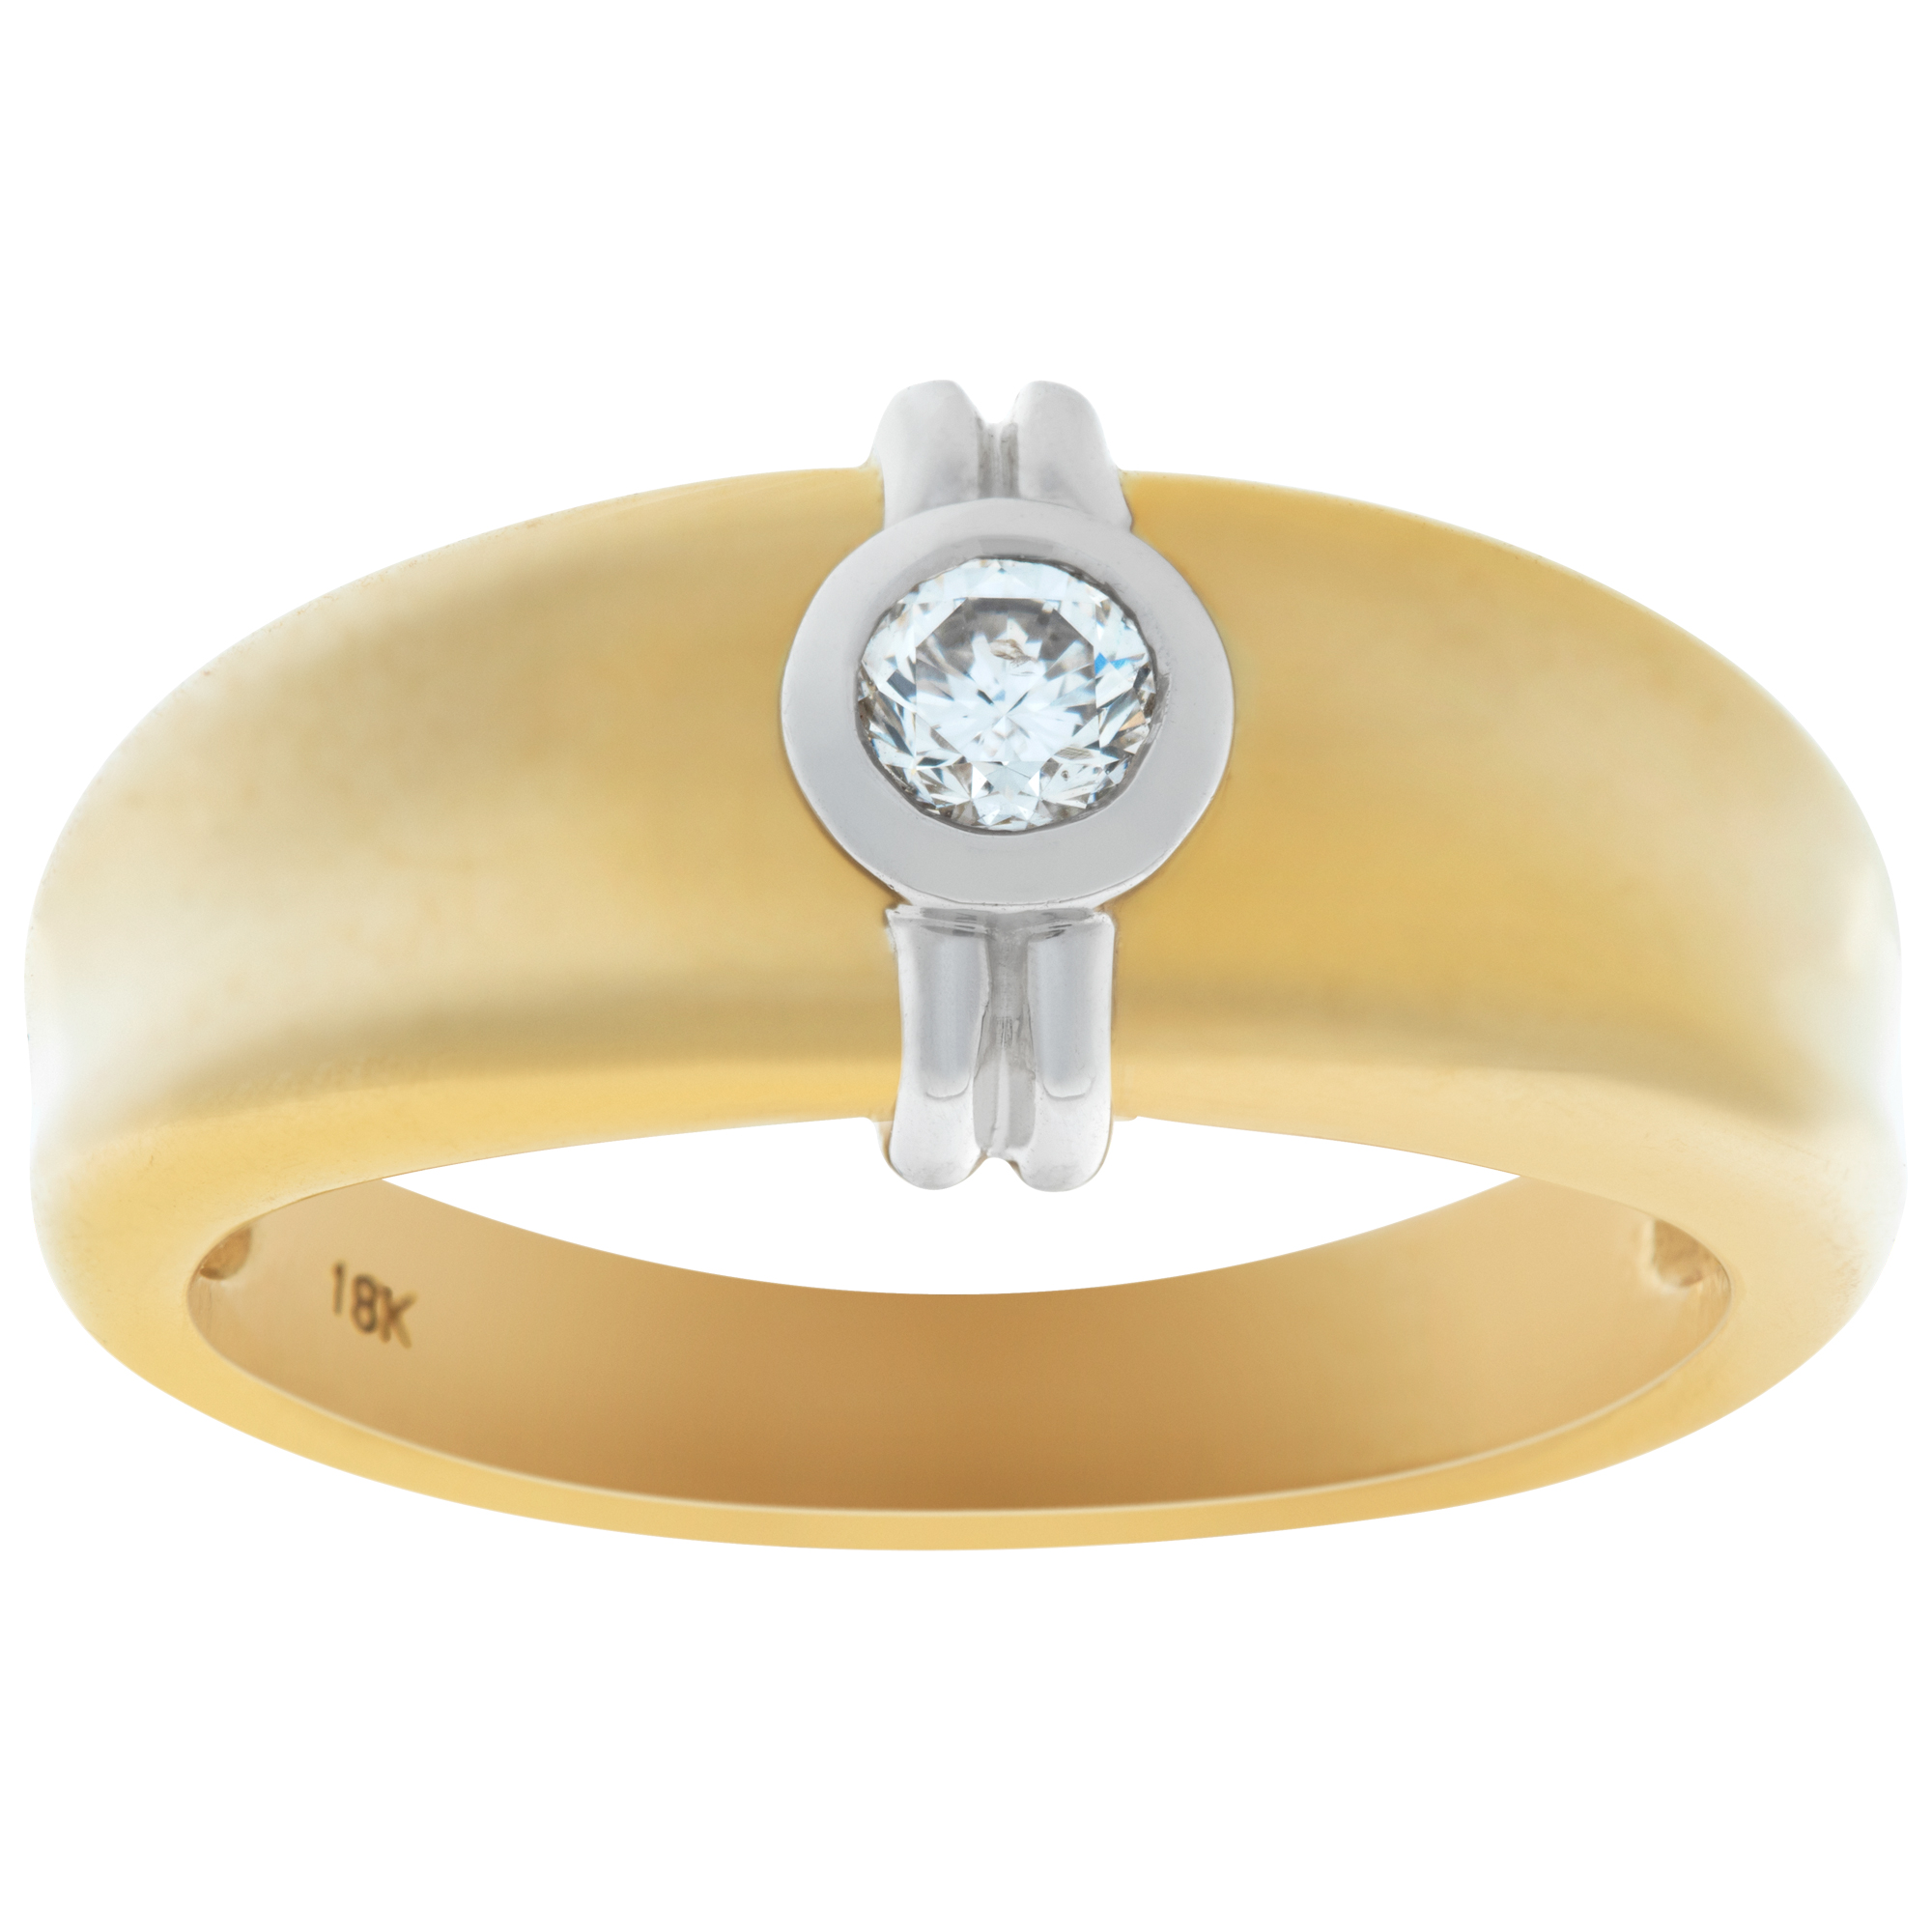 Men's ring with approx. 0.25 carat round brilliant cut center diamond in 18K yellow & white gold. Si image 1